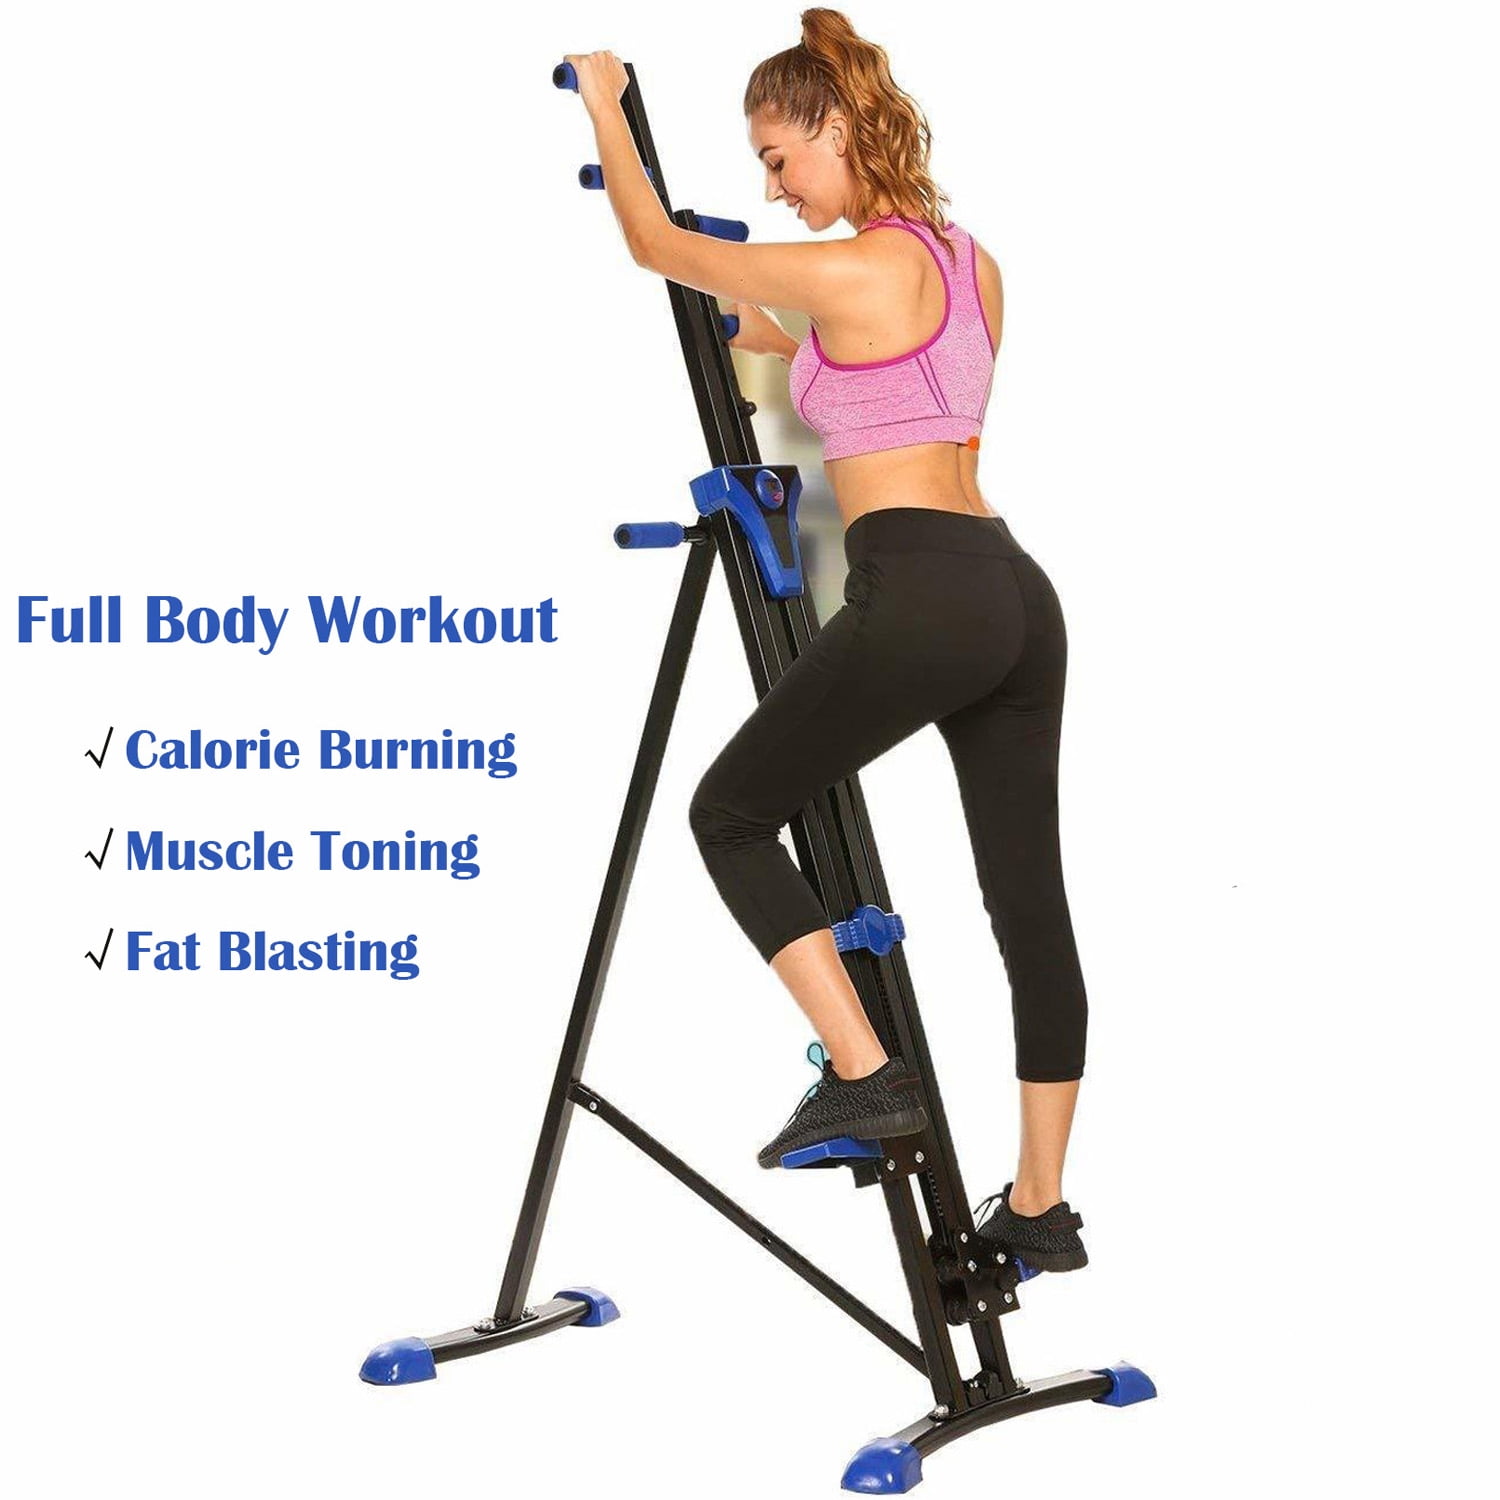 Home Gym Climbing Stepper for Full Body Cardio Workout Vertical Climber Exercise Machine Upgraded Folding Stair Climber Machine 